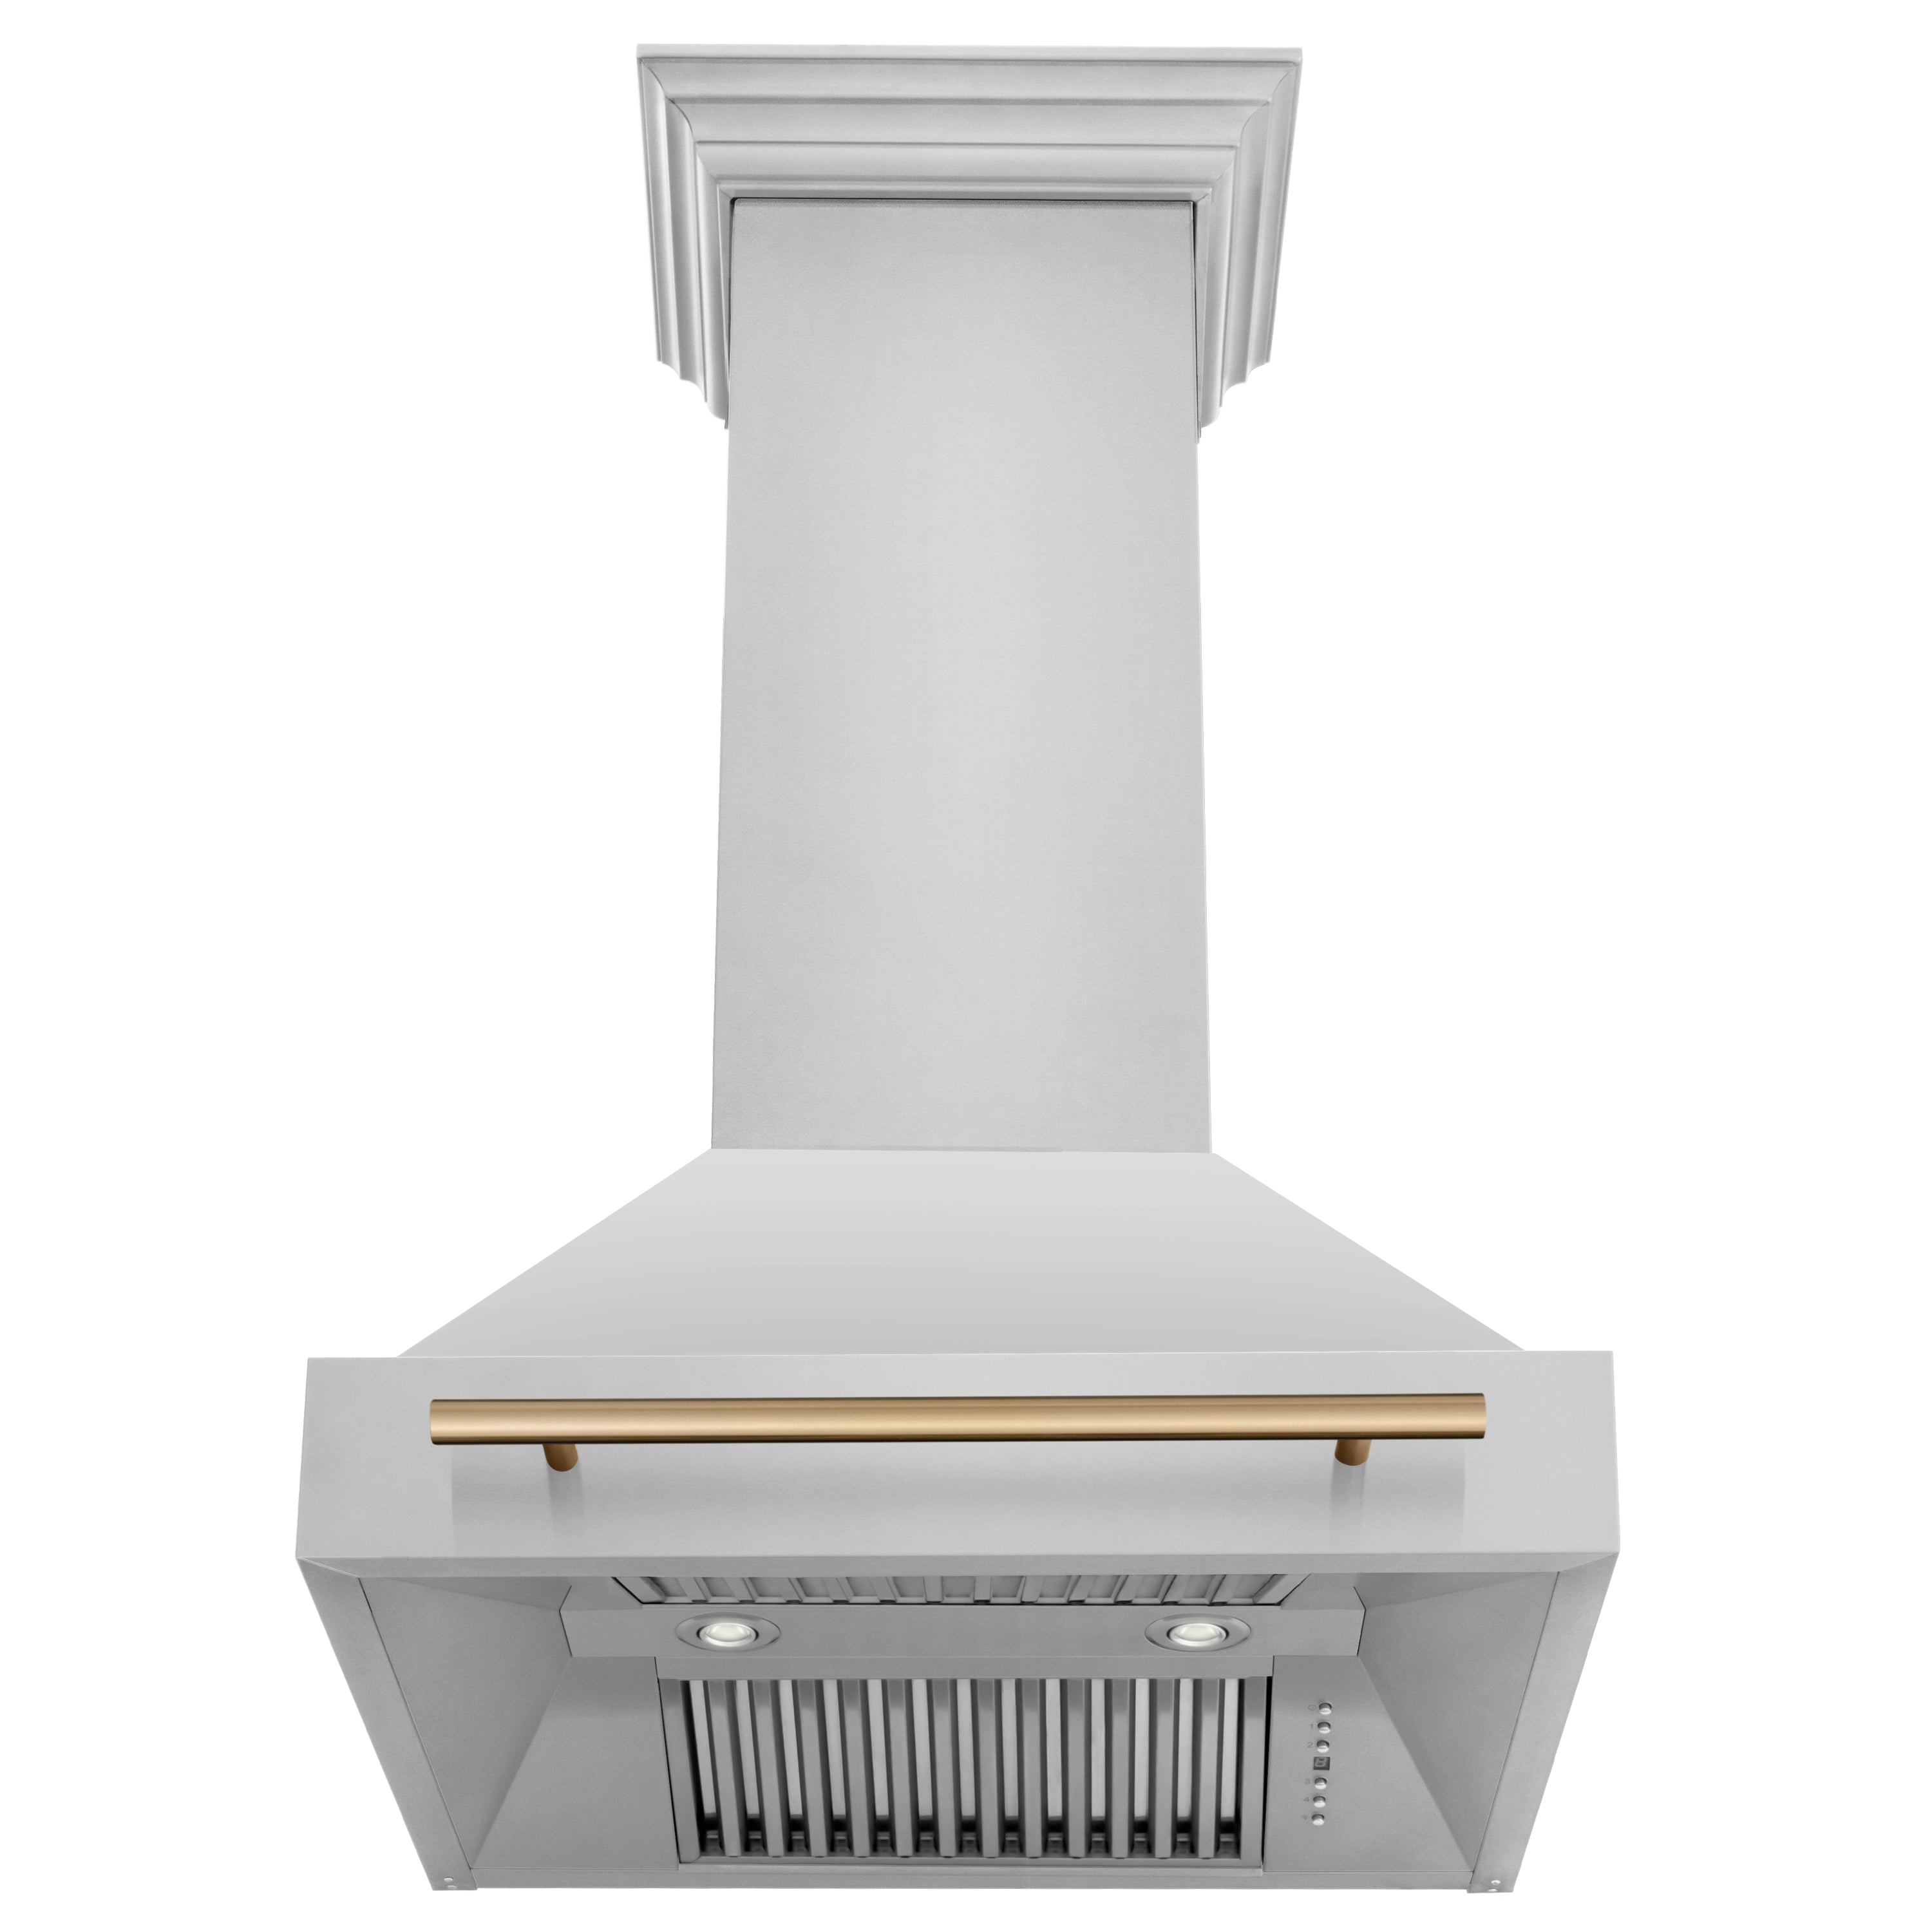 ZLINE 30" Autograph Edition Stainless Steel Range Hood with Stainless Steel Shell and Champagne Bronze Handle (8654STZ-30-CB)